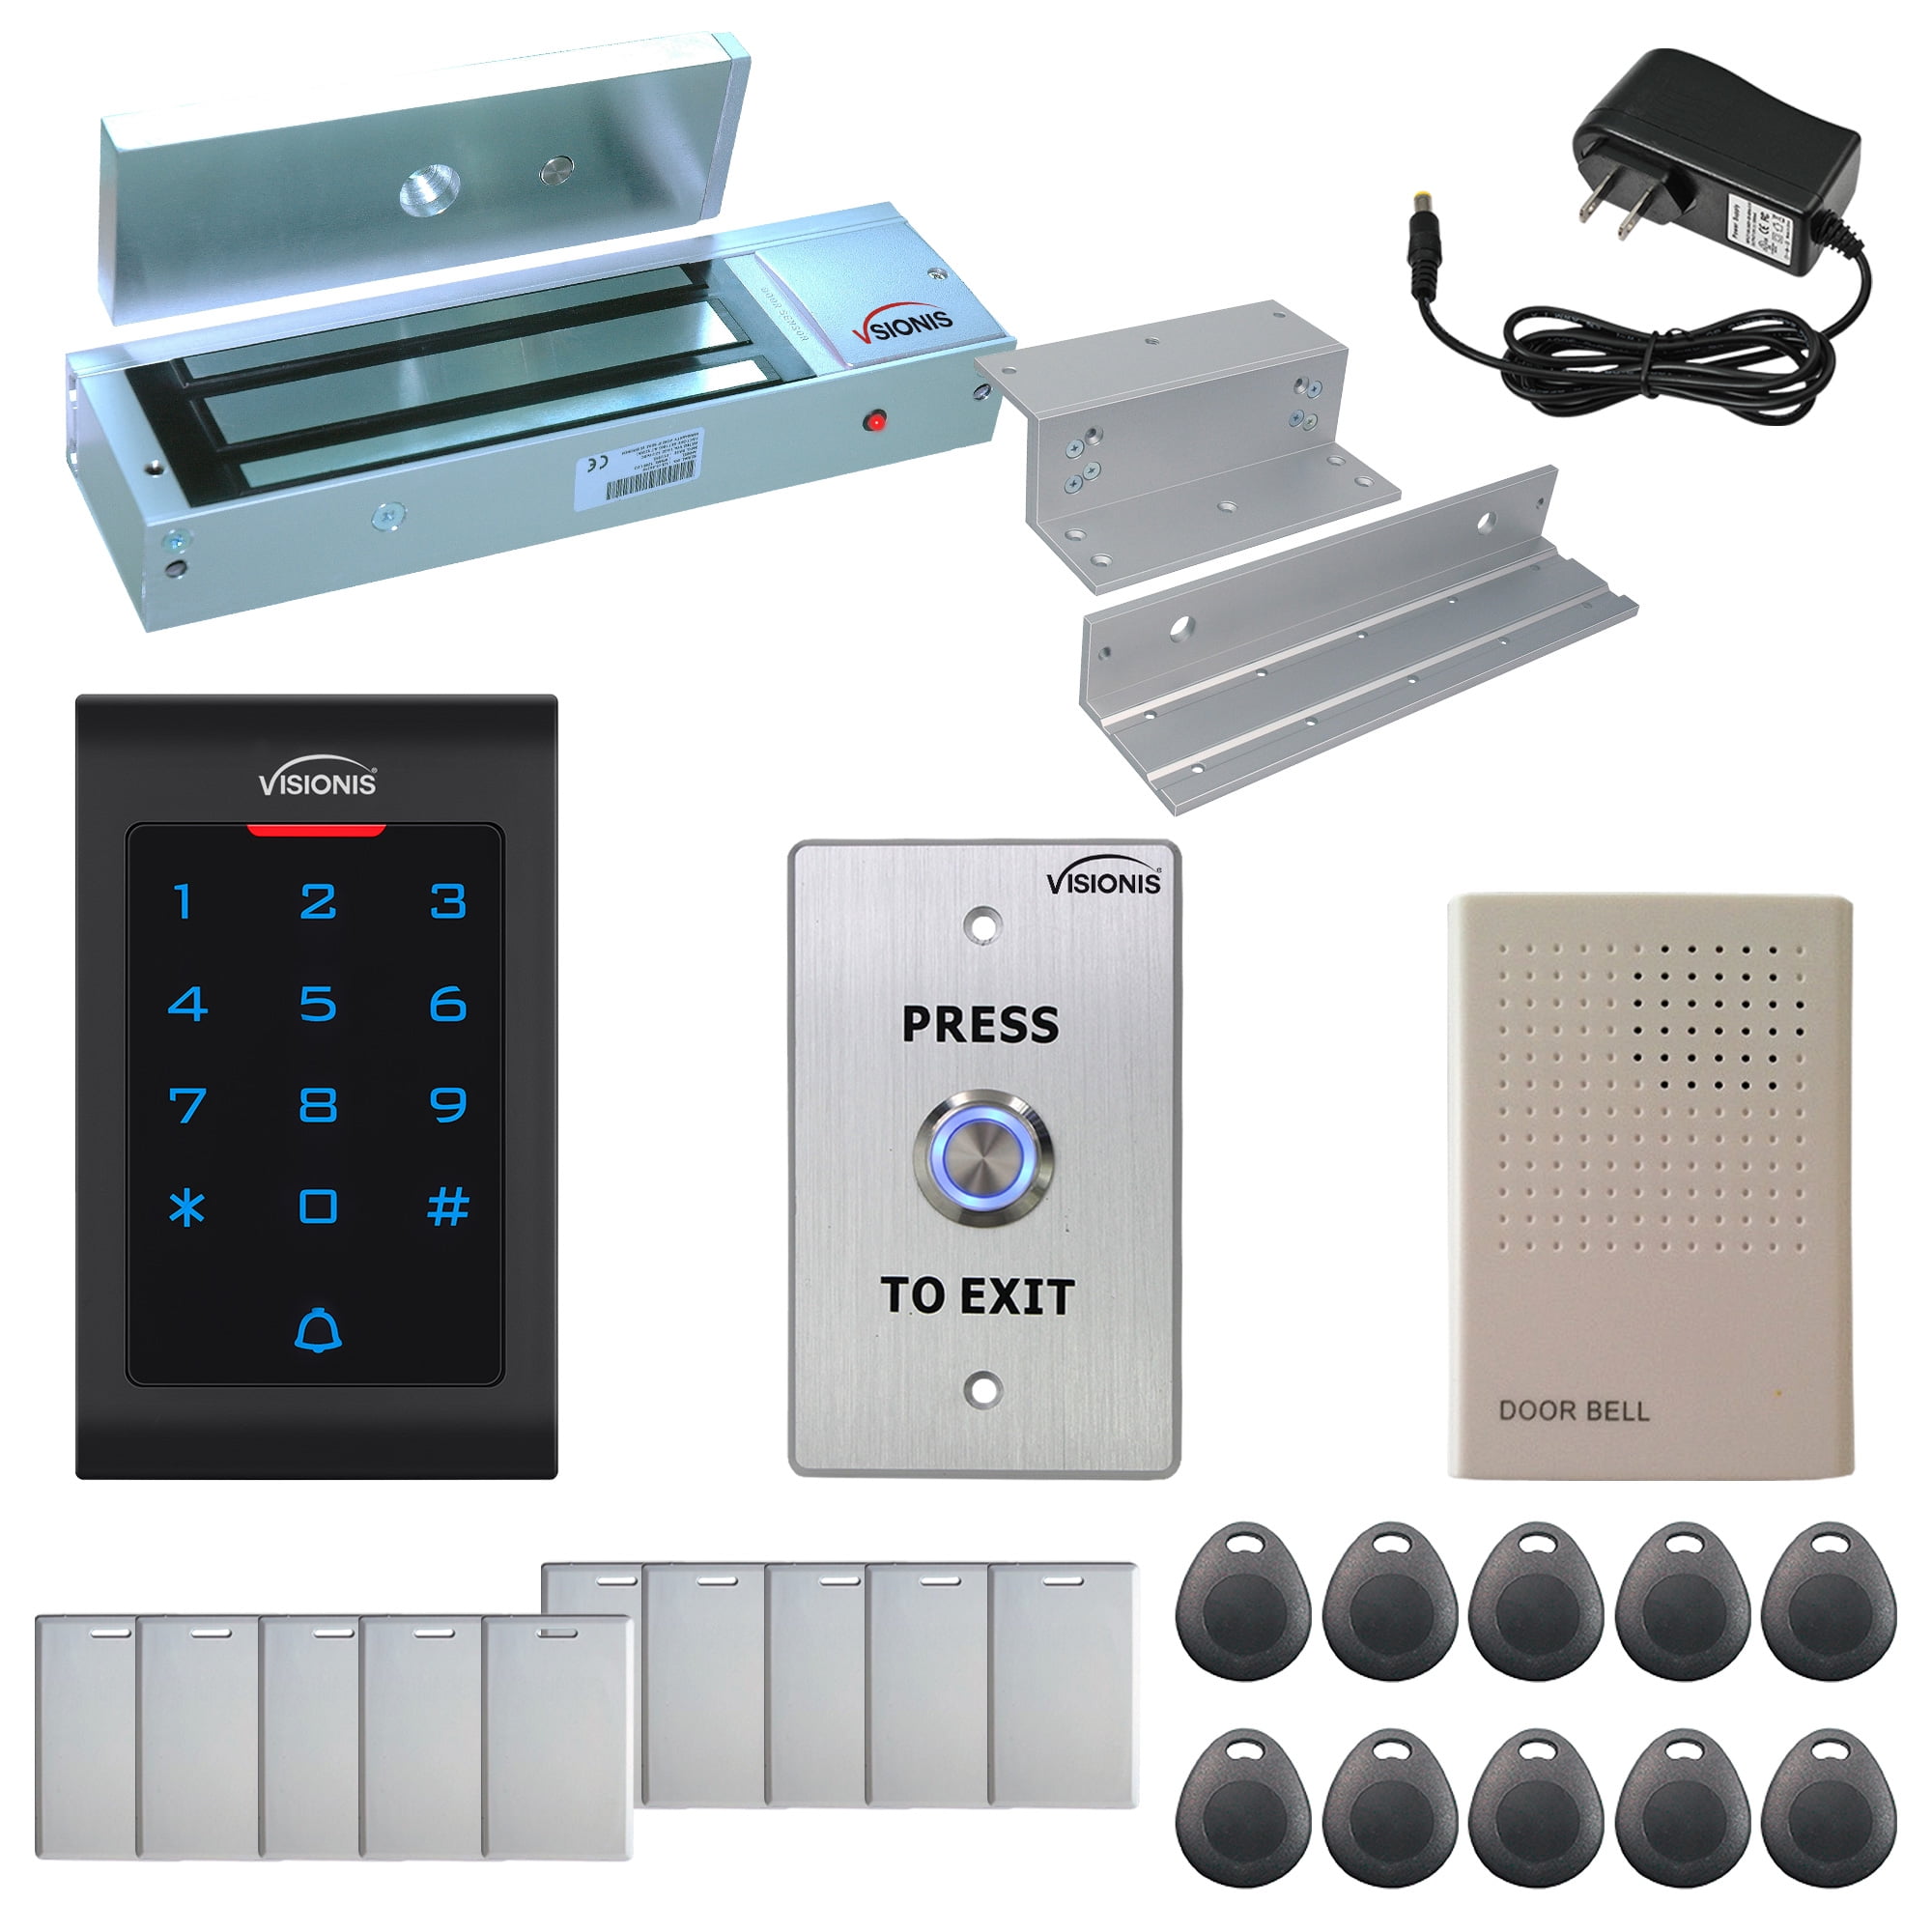 Visionis FPC-5327 One Door Access Control Inswinging Door 600lbs Maglock with VIS-3002 Indoor use only Keypad/Reader Standalone no Software EM Card Compatible 500 Users kit 